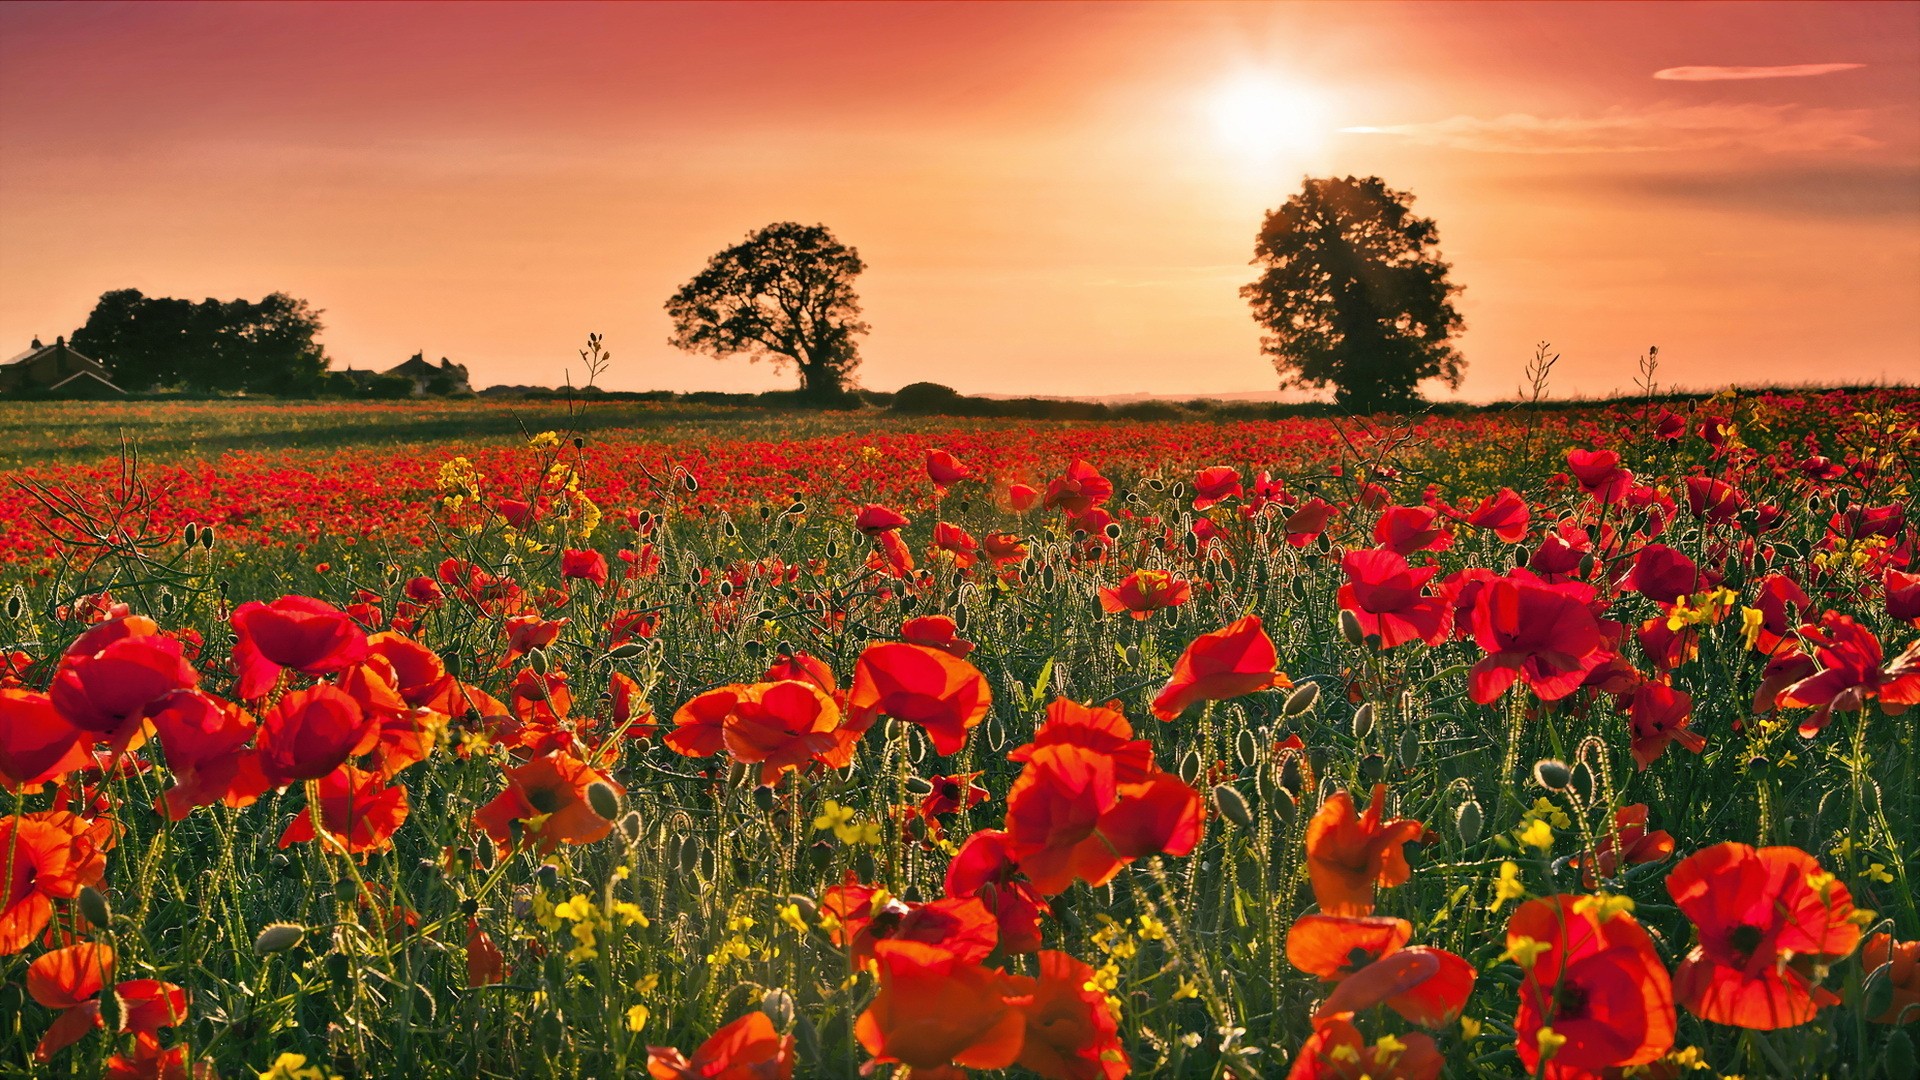 General 1920x1080 nature field landscape trees poppies plants Sun outdoors